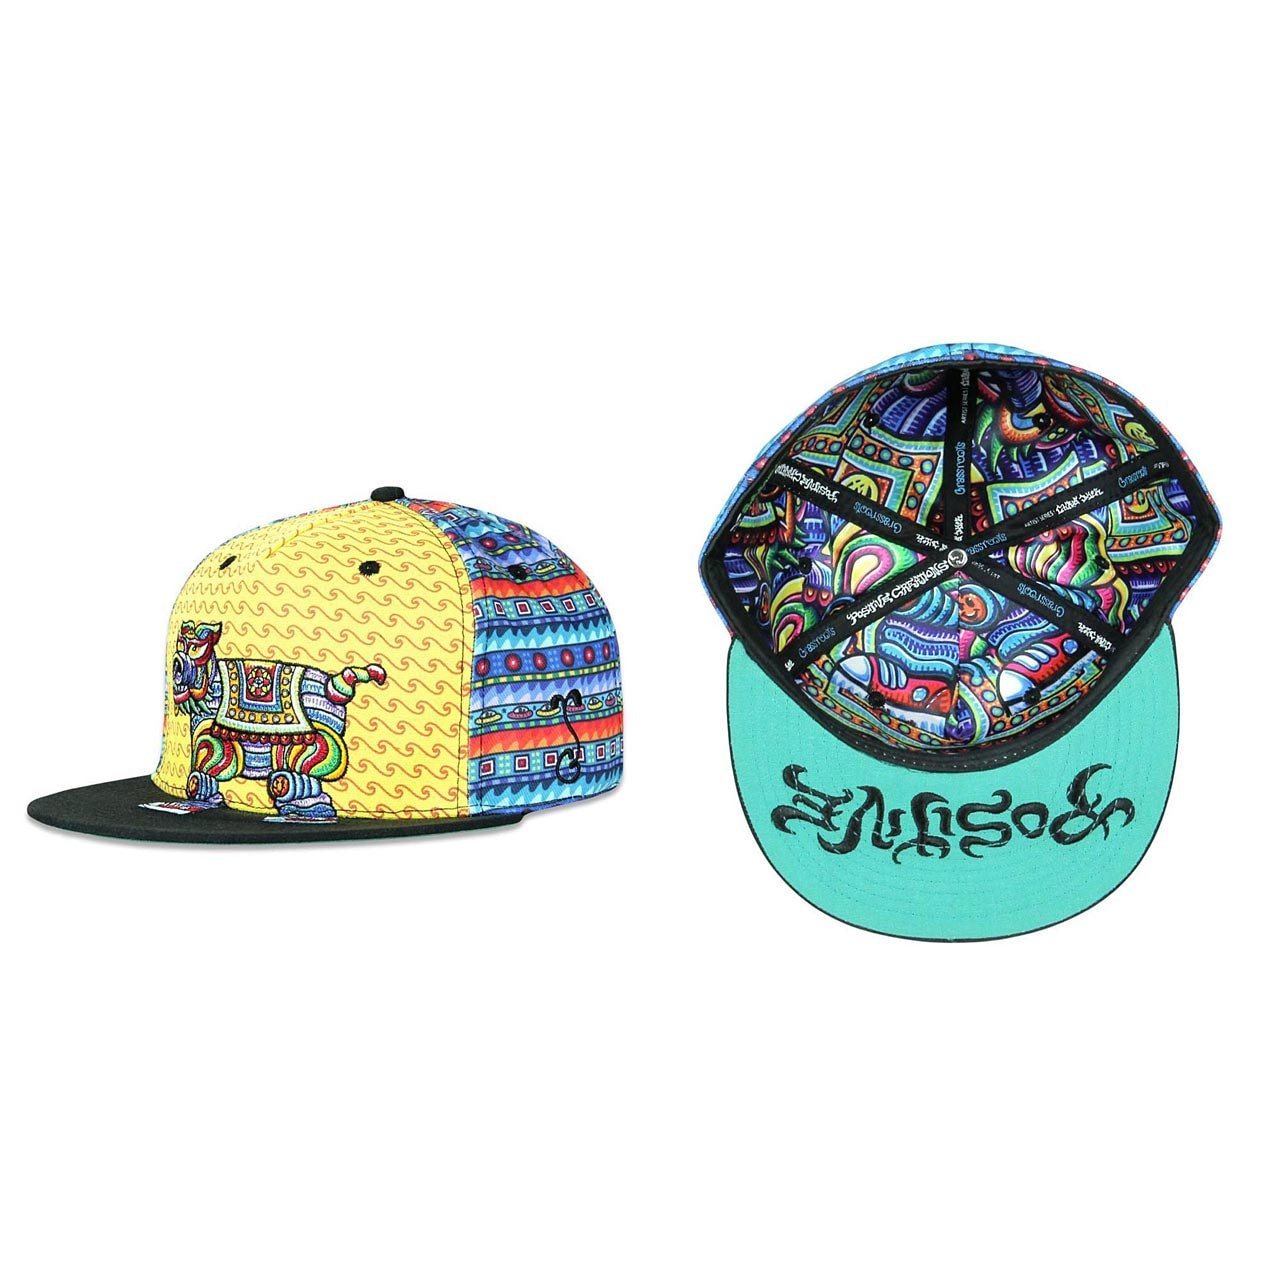 Buy a Chris Dyer Bear Elephant Dog Fitted Hat Online